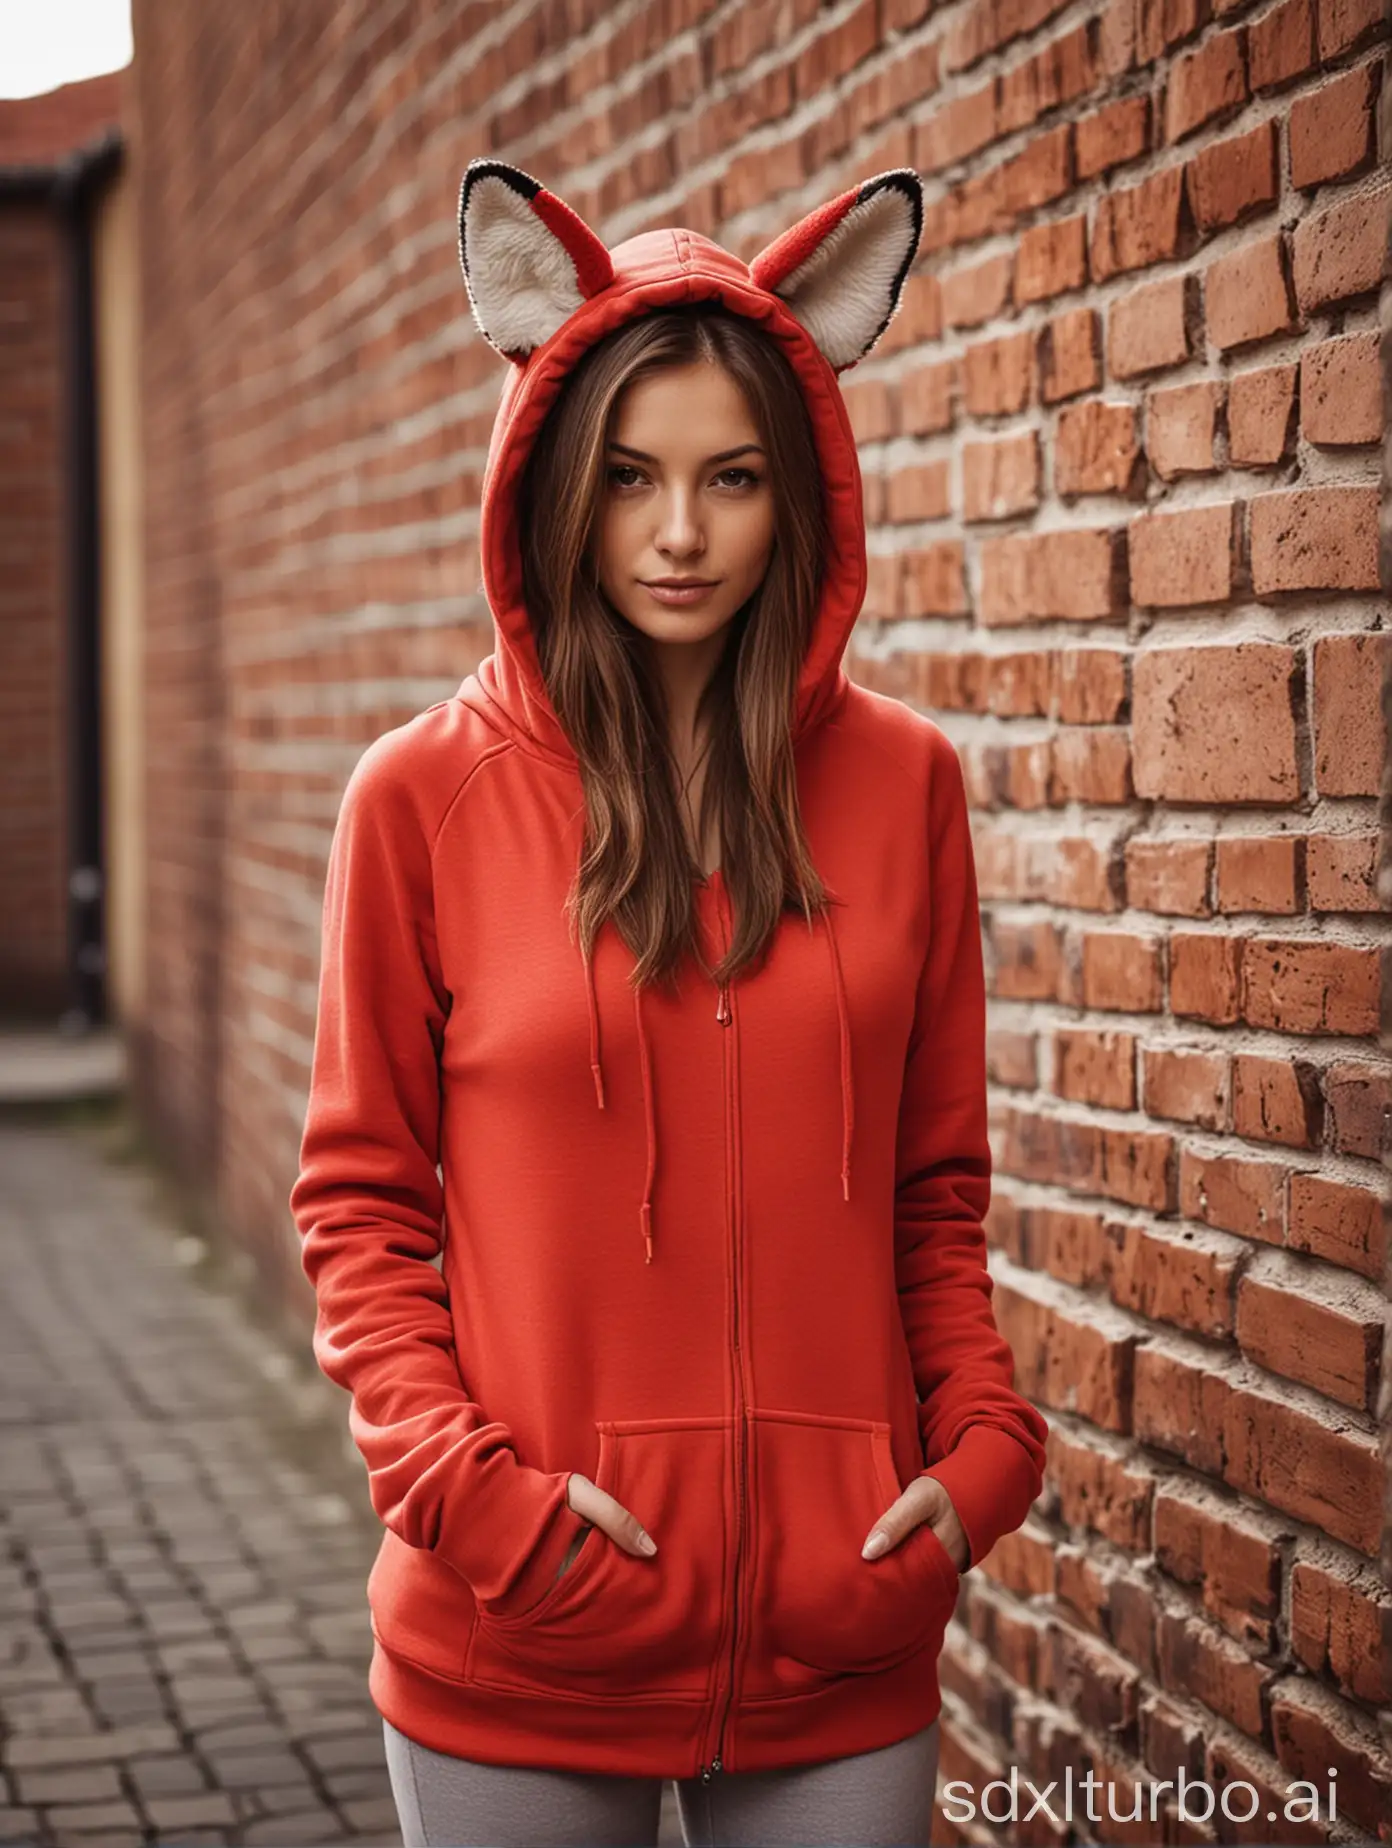 Stylish-Woman-in-Red-Fox-Animal-Hoodie-Standing-Against-Brick-Wall-with-Bokeh-Effect